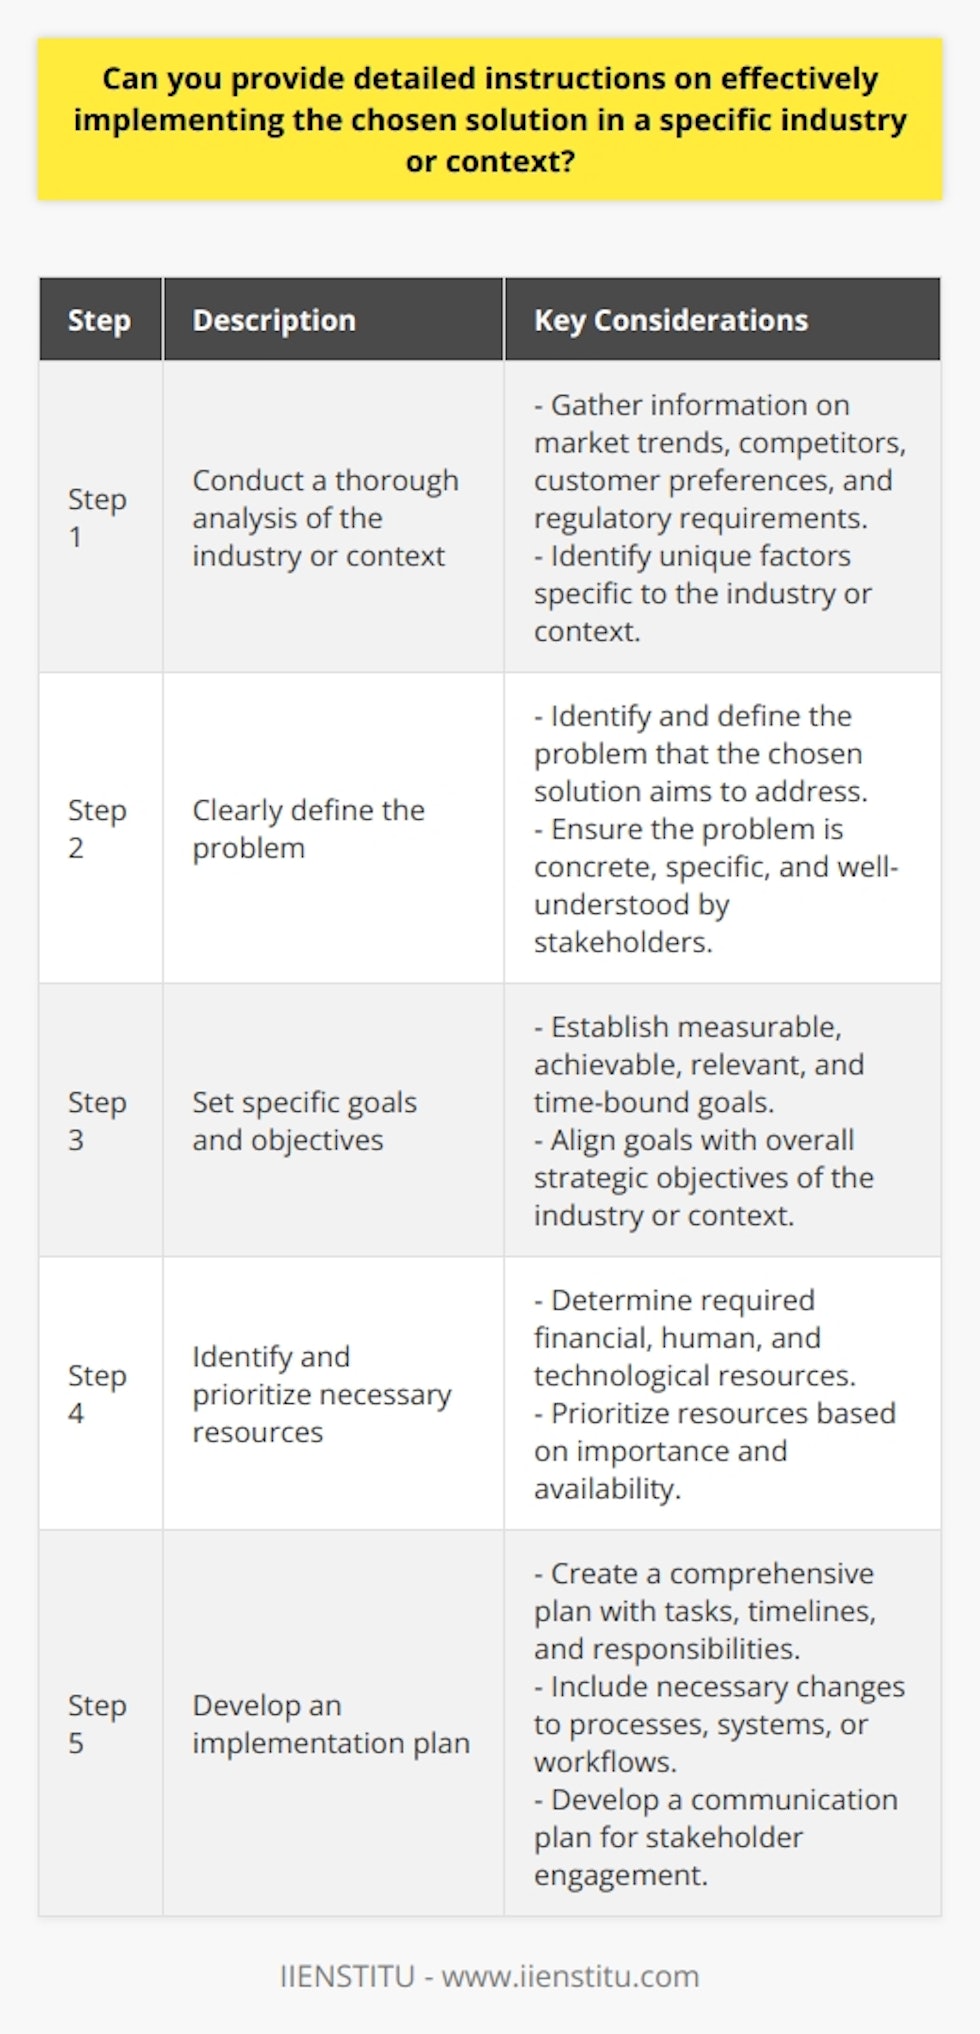 Step 1: Conduct a thorough analysis of the industry or contextBefore implementing any solution, it is essential to have a deep understanding of the industry or context in which the solution will be implemented. This analysis should include gathering information on current market trends, competitors, customer preferences, regulatory requirements, and any unique factors specific to the industry or context.Step 2: Clearly define the problemIdentify and clearly define the problem that the chosen solution aims to address. The problem should be concrete, specific, and well-understood by all stakeholders involved in the implementation process. This step is crucial as it sets the foundation for the entire implementation plan.Step 3: Set specific goals and objectivesEstablish clear goals and objectives for the implementation process. These goals should be measurable, achievable, relevant, and time-bound. They should align with the overall strategic objectives of the industry or context and provide a roadmap for the implementation process.Step 4: Identify and prioritize necessary resourcesDetermine the resources required for successful implementation, including financial, human, and technological resources. It is important to prioritize these resources based on their importance and availability. This step helps ensure that the necessary resources are allocated efficiently and effectively.Step 5: Develop an implementation planCreate a comprehensive implementation plan detailing specific tasks, timelines, and responsibilities. The plan should outline the steps required to implement the chosen solution, including any necessary changes to processes, systems, or workflows. It should also include a communication plan to ensure effective stakeholder engagement throughout the implementation process.Step 6: Test and refine the solutionBefore fully implementing the chosen solution, it is vital to conduct a pilot test or trial run to assess its feasibility and effectiveness. This step allows for any necessary adjustments or refinements to be made based on feedback and data collected during the testing phase.Step 7: Implement the solution and monitor progressOnce the pilot test is successfully conducted, begin the full implementation of the chosen solution. Monitor progress closely using key performance indicators (KPIs) and regularly evaluate the impact and effectiveness of the solution. This step helps identify any issues or obstacles early on, allowing for prompt corrective action.Step 8: Provide necessary training and supportEnsure that all stakeholders involved in the implementation process receive appropriate training and support. This includes training users on any new tools, systems, or processes introduced through the chosen solution. Ongoing support should be provided to address any questions, concerns, or challenges that may arise during implementation.Step 9: Continuously improve and innovateImplementation is not a one-time event but an ongoing process. Encourage a culture of continuous improvement and innovation to keep the chosen solution up to date and maintain its long-term effectiveness. Regularly review and reassess the solution's impact, gather feedback from users, and explore opportunities for further optimization.By following these steps and customizing them to fit the specific industry or context, you can effectively implement the chosen solution and increase the likelihood of success. Keep in mind that adaptability, collaboration, and clear communication are key factors in overcoming challenges and achieving desired outcomes.